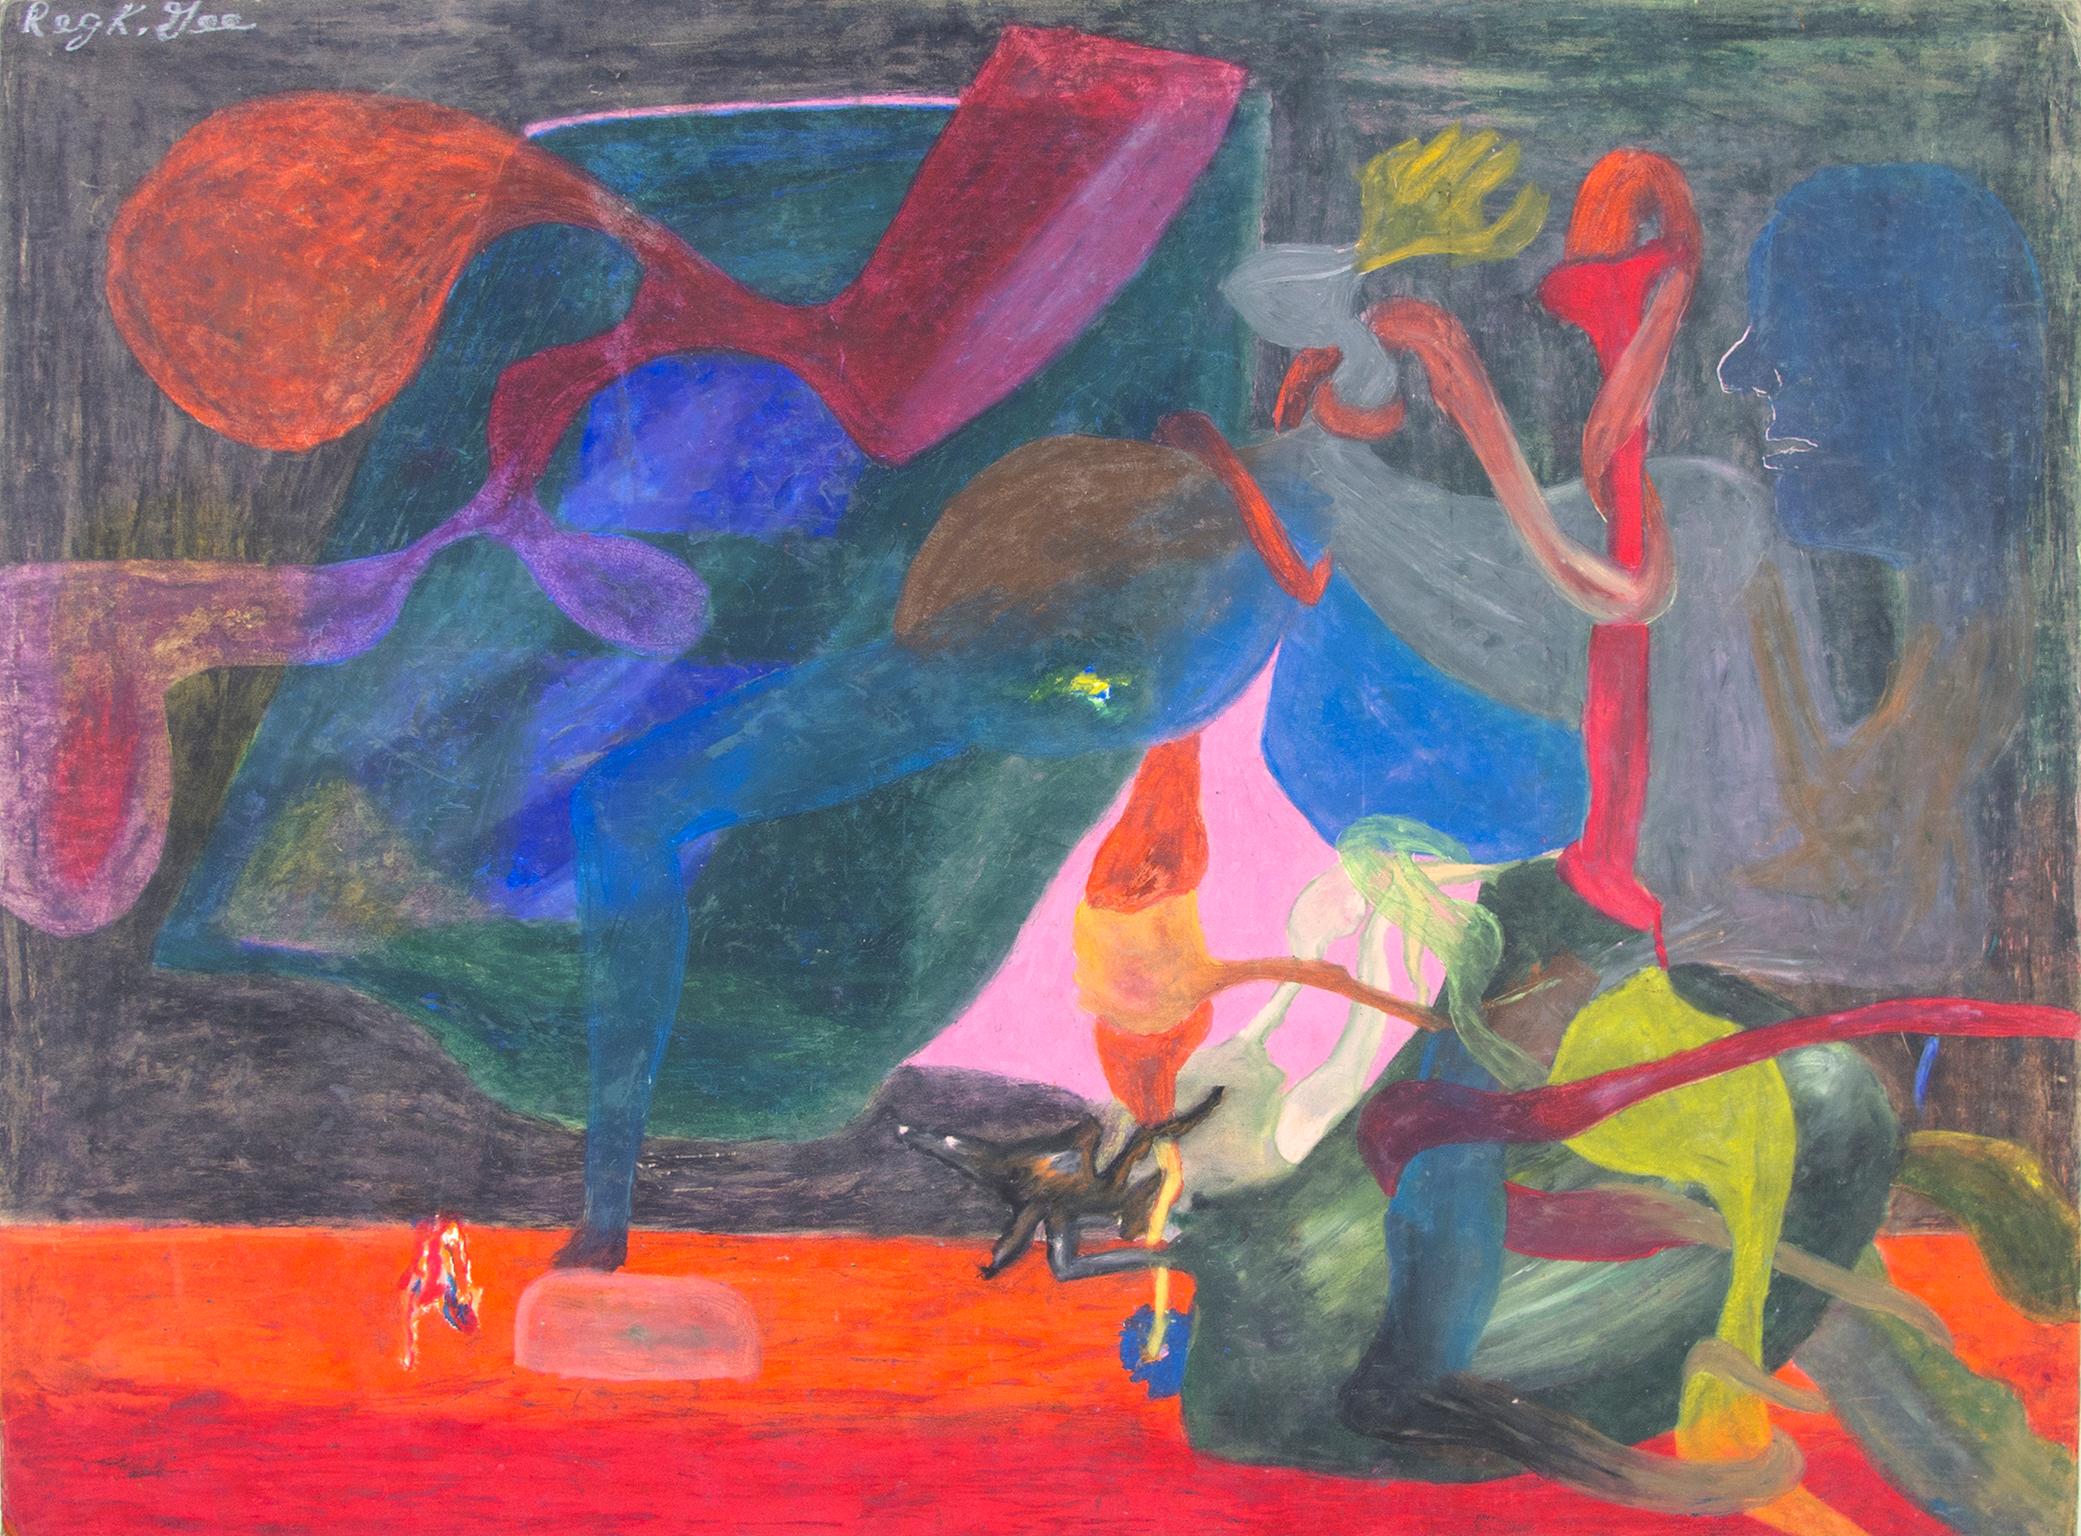 "Therapeutic Horse Knowledge" is an original oil pastel drawing on board by Reginald K. Gee. The artist signed the piece upper left. This piece features a surreal and abstract environment with bright colors and abstract figures. 

30" x 40" 
Custom